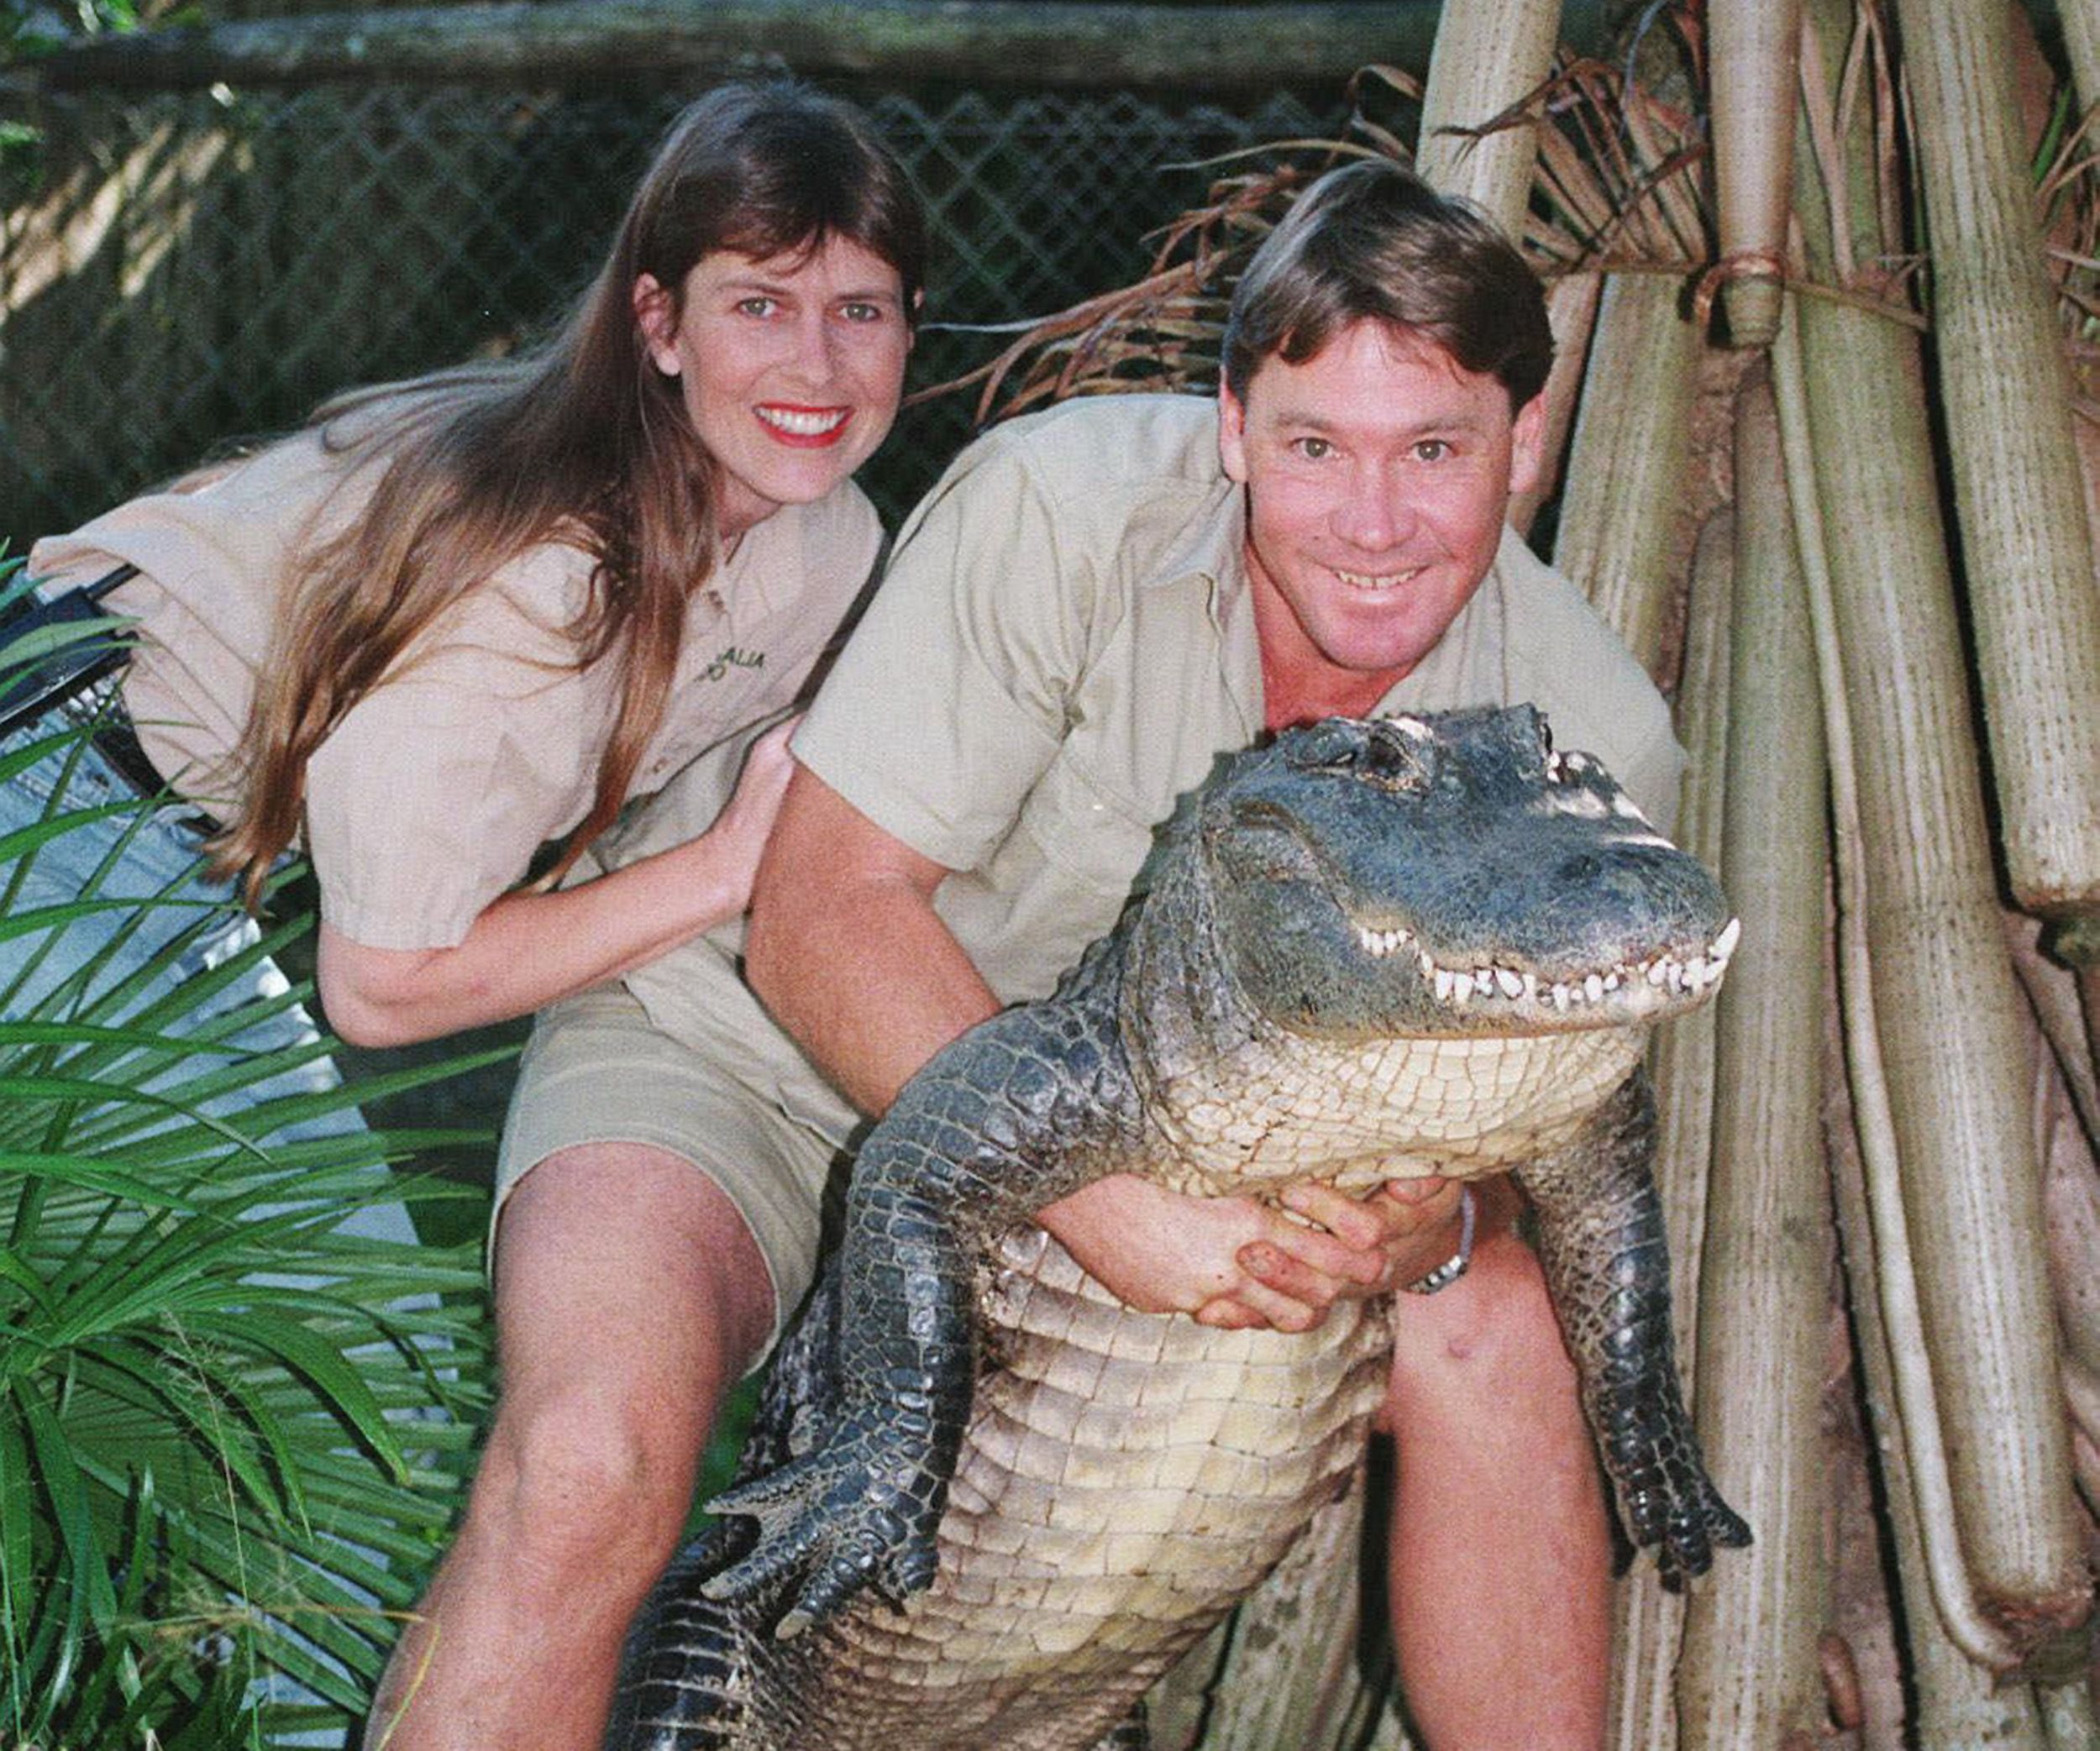 <p><span>When the Crocodile Hunter, Steve Irwin, died from a stingray attack on Sept. 4, 2006, he left behind wife Terri Irwin and their two kids, Bindi Irwin and Robert Irwin.</span></p><p>"I keep saying this, and I think maybe 15 years later people are finally starting to believe me, Steve was it for me," Terri -- who runs the Australia Zoo with her kids -- told QWeekend in 2021. "That's just the way it is. I had a big, big love and it was enough to last a lifetime." </p>